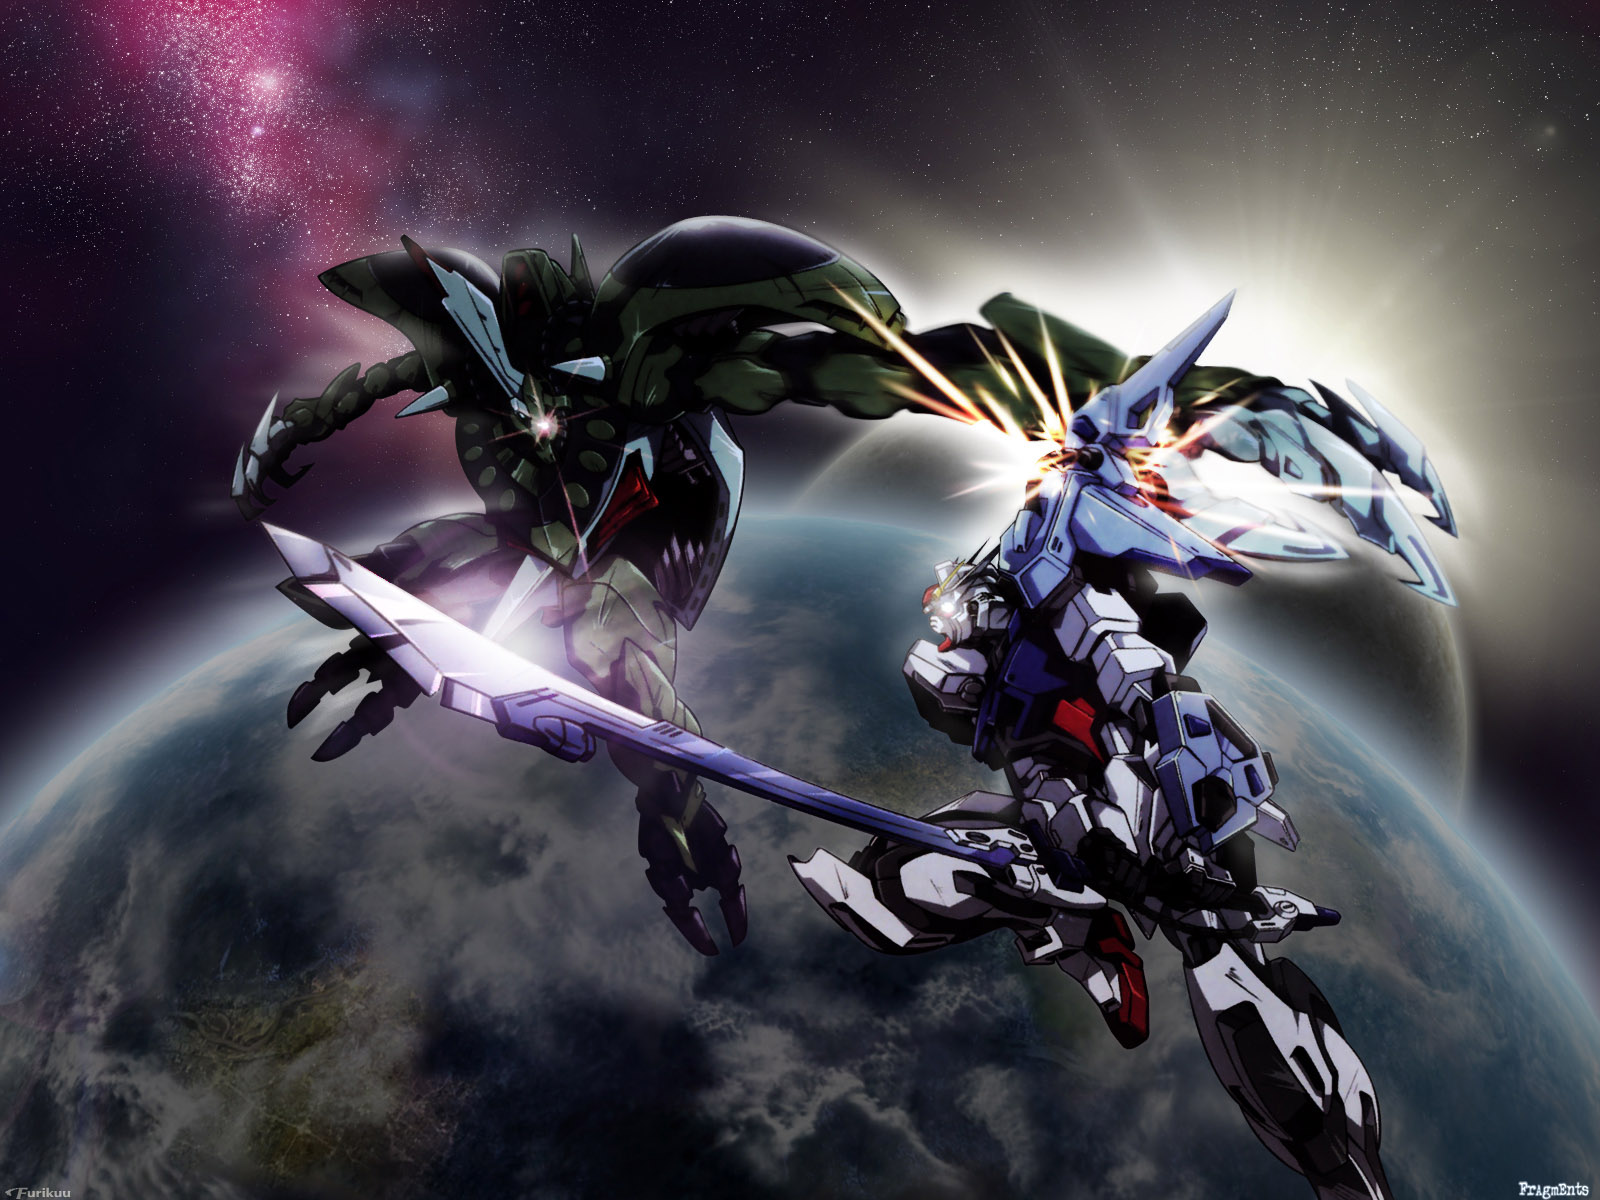 Gundam Seed mobile suit in high-definition wallpaper.